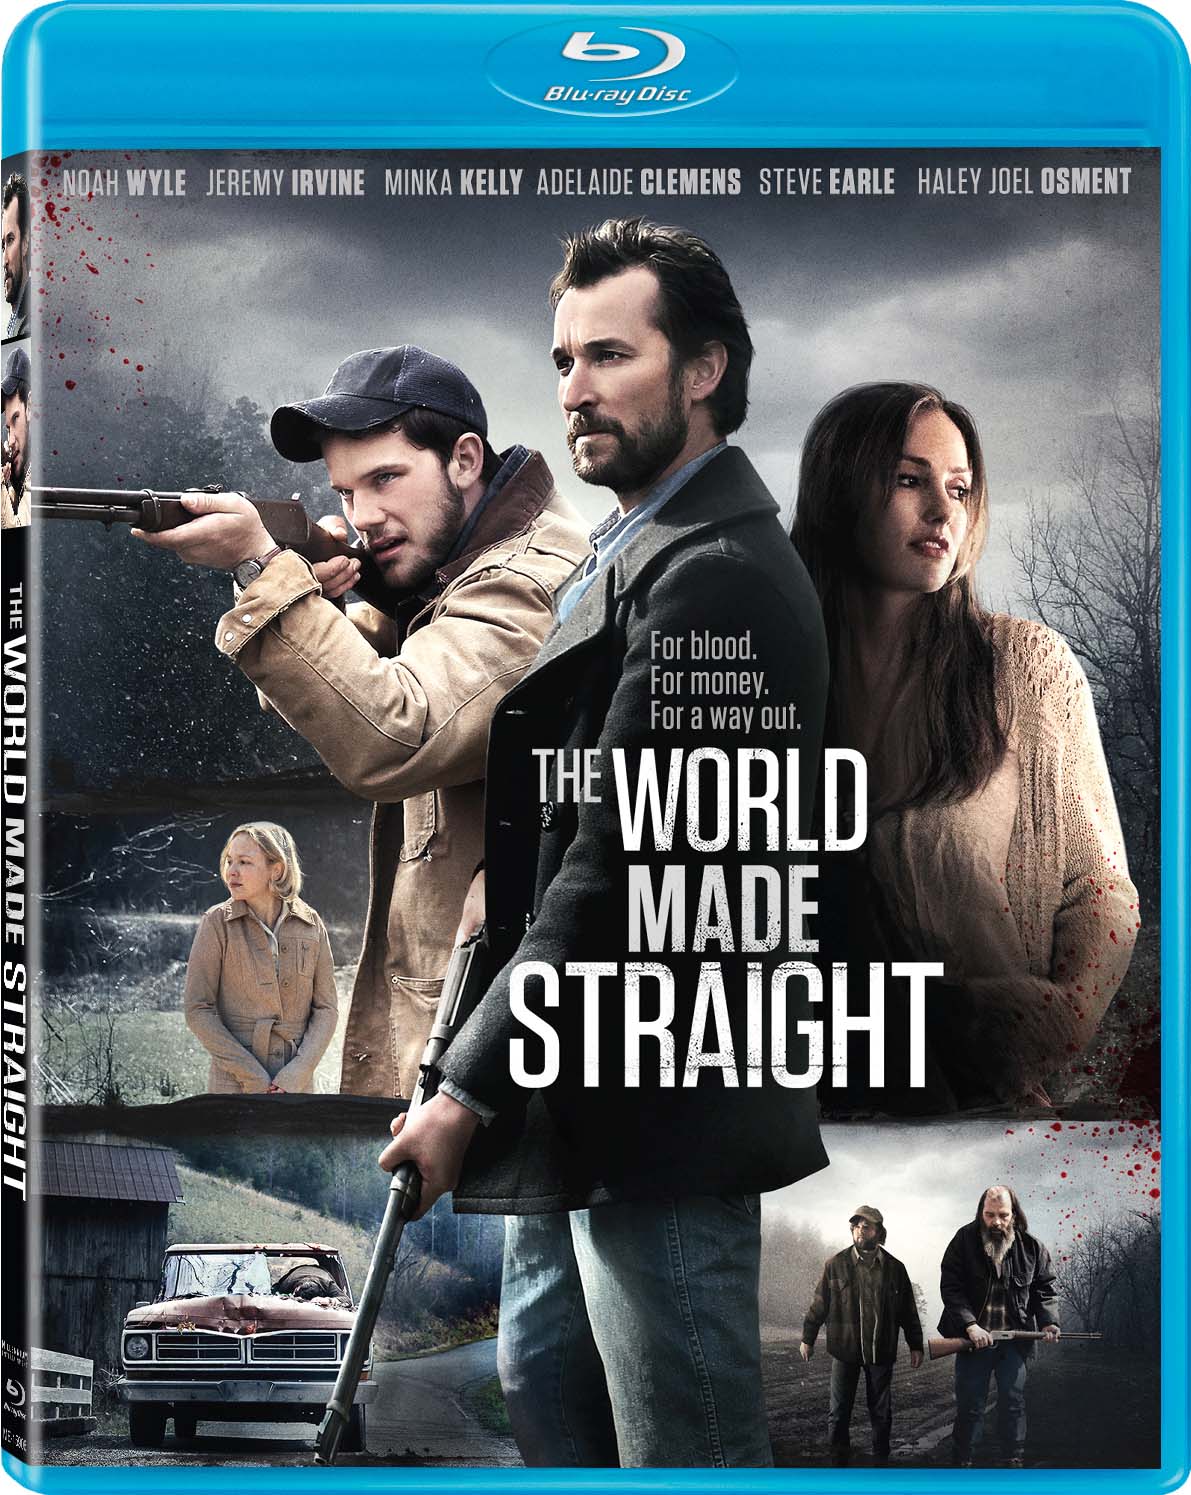 The World Made Straight Blu-ray Review